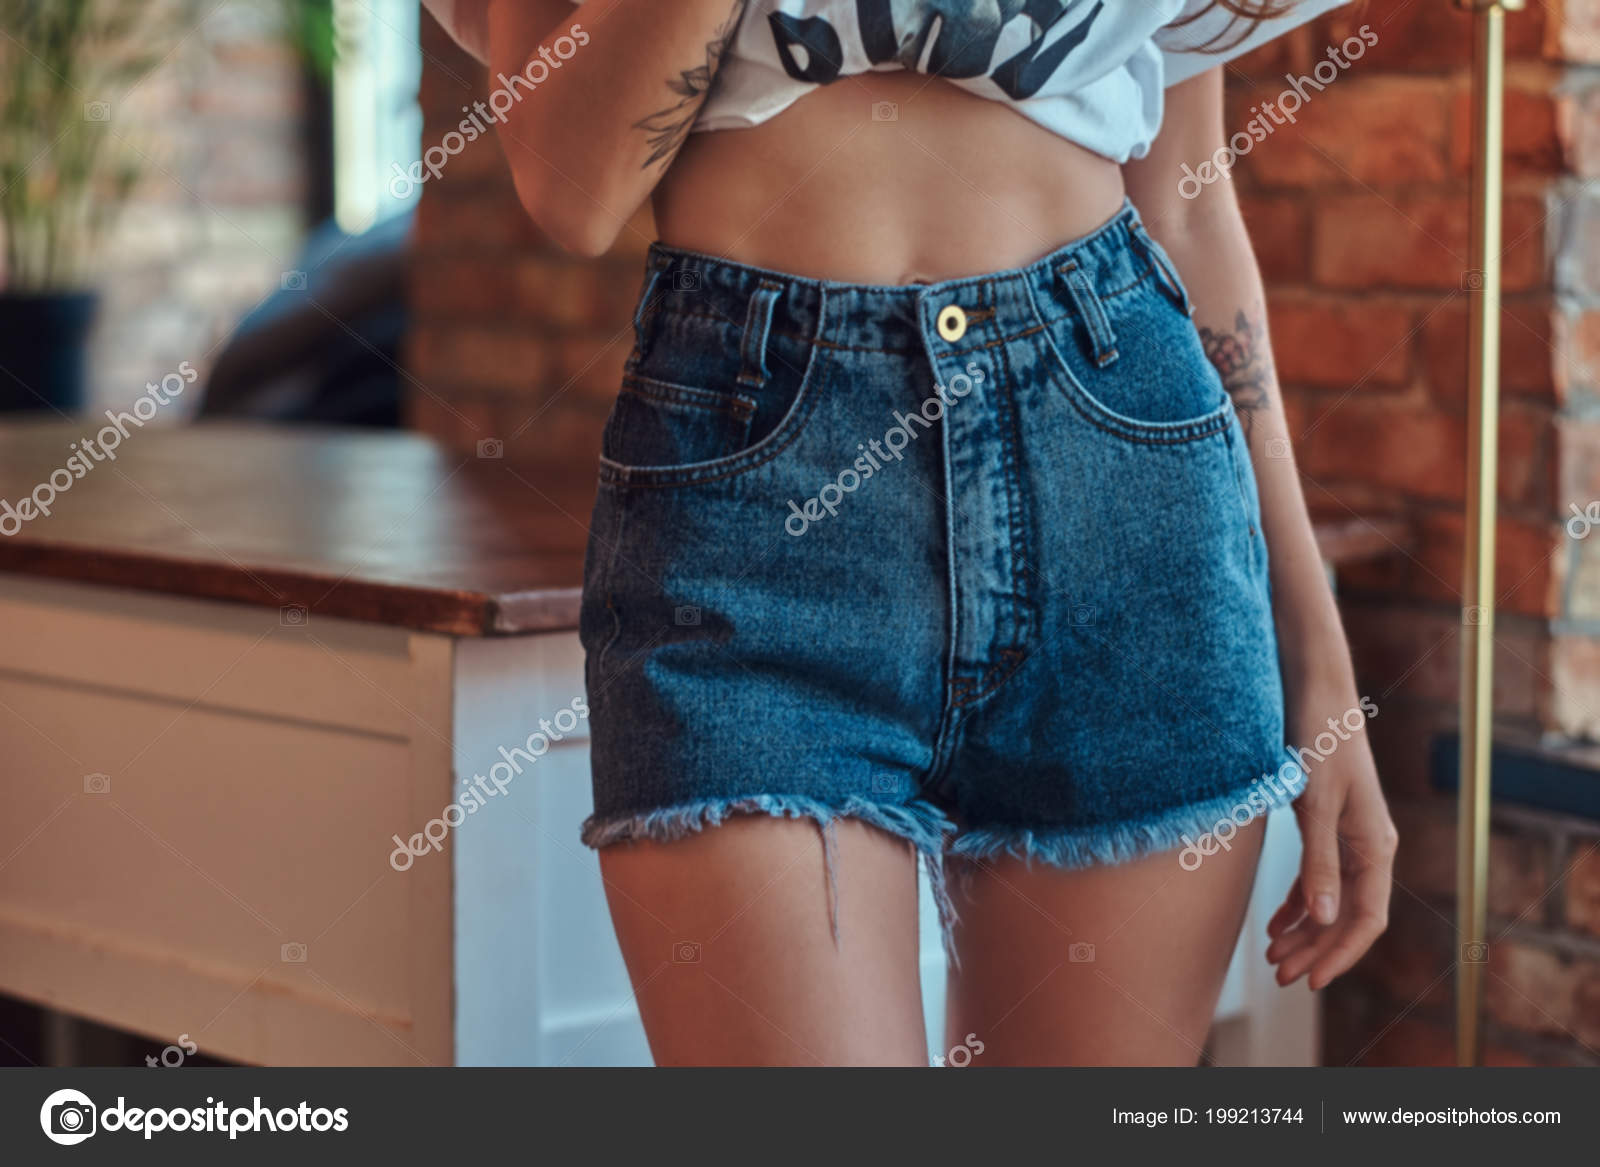 Teen Girl With Unzipped Shorts